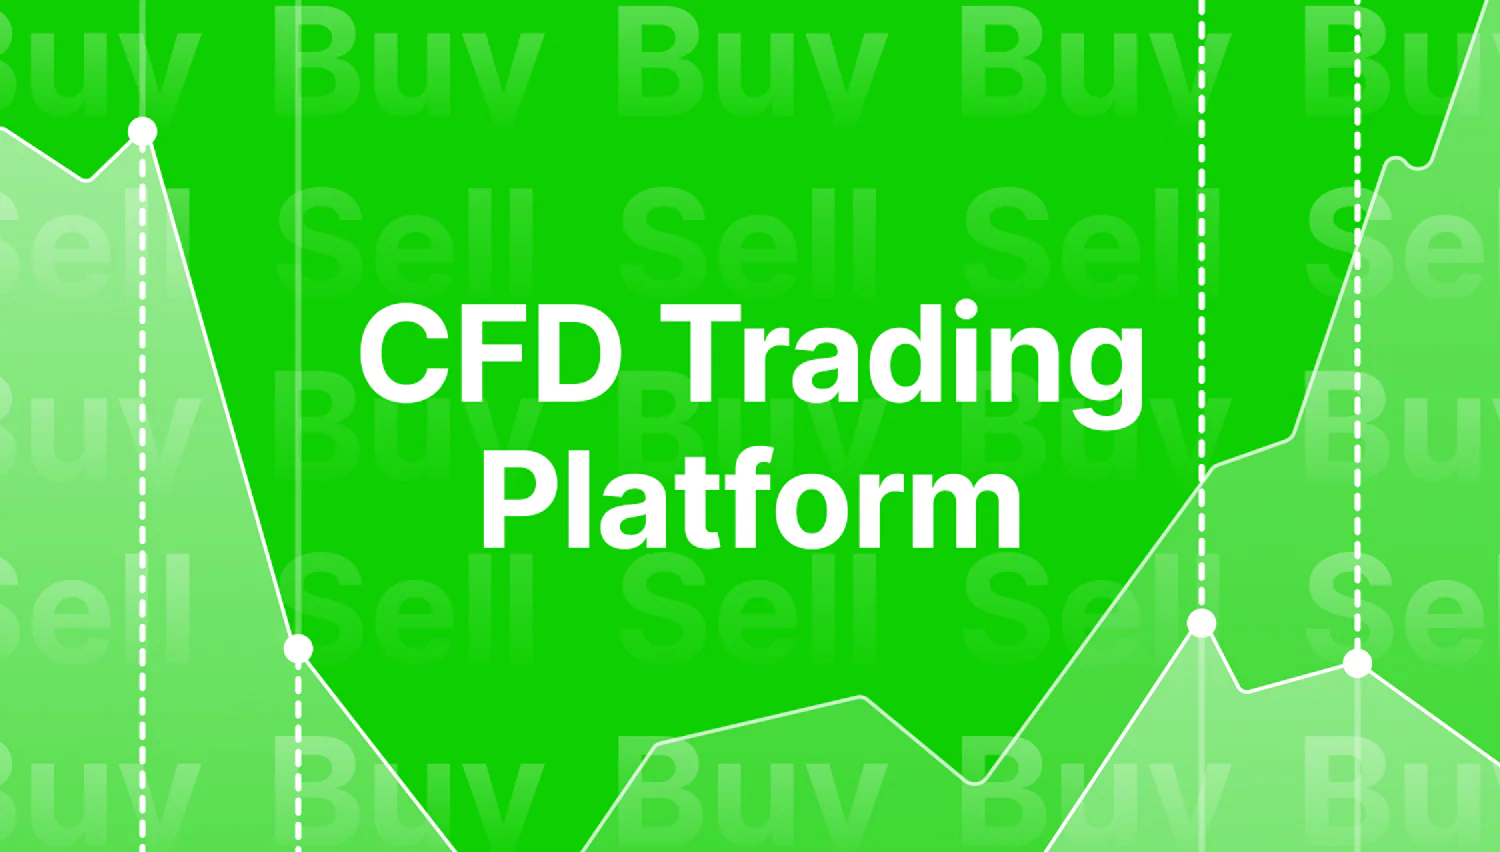 How to Get Liquidity for a CFD Trading Platform